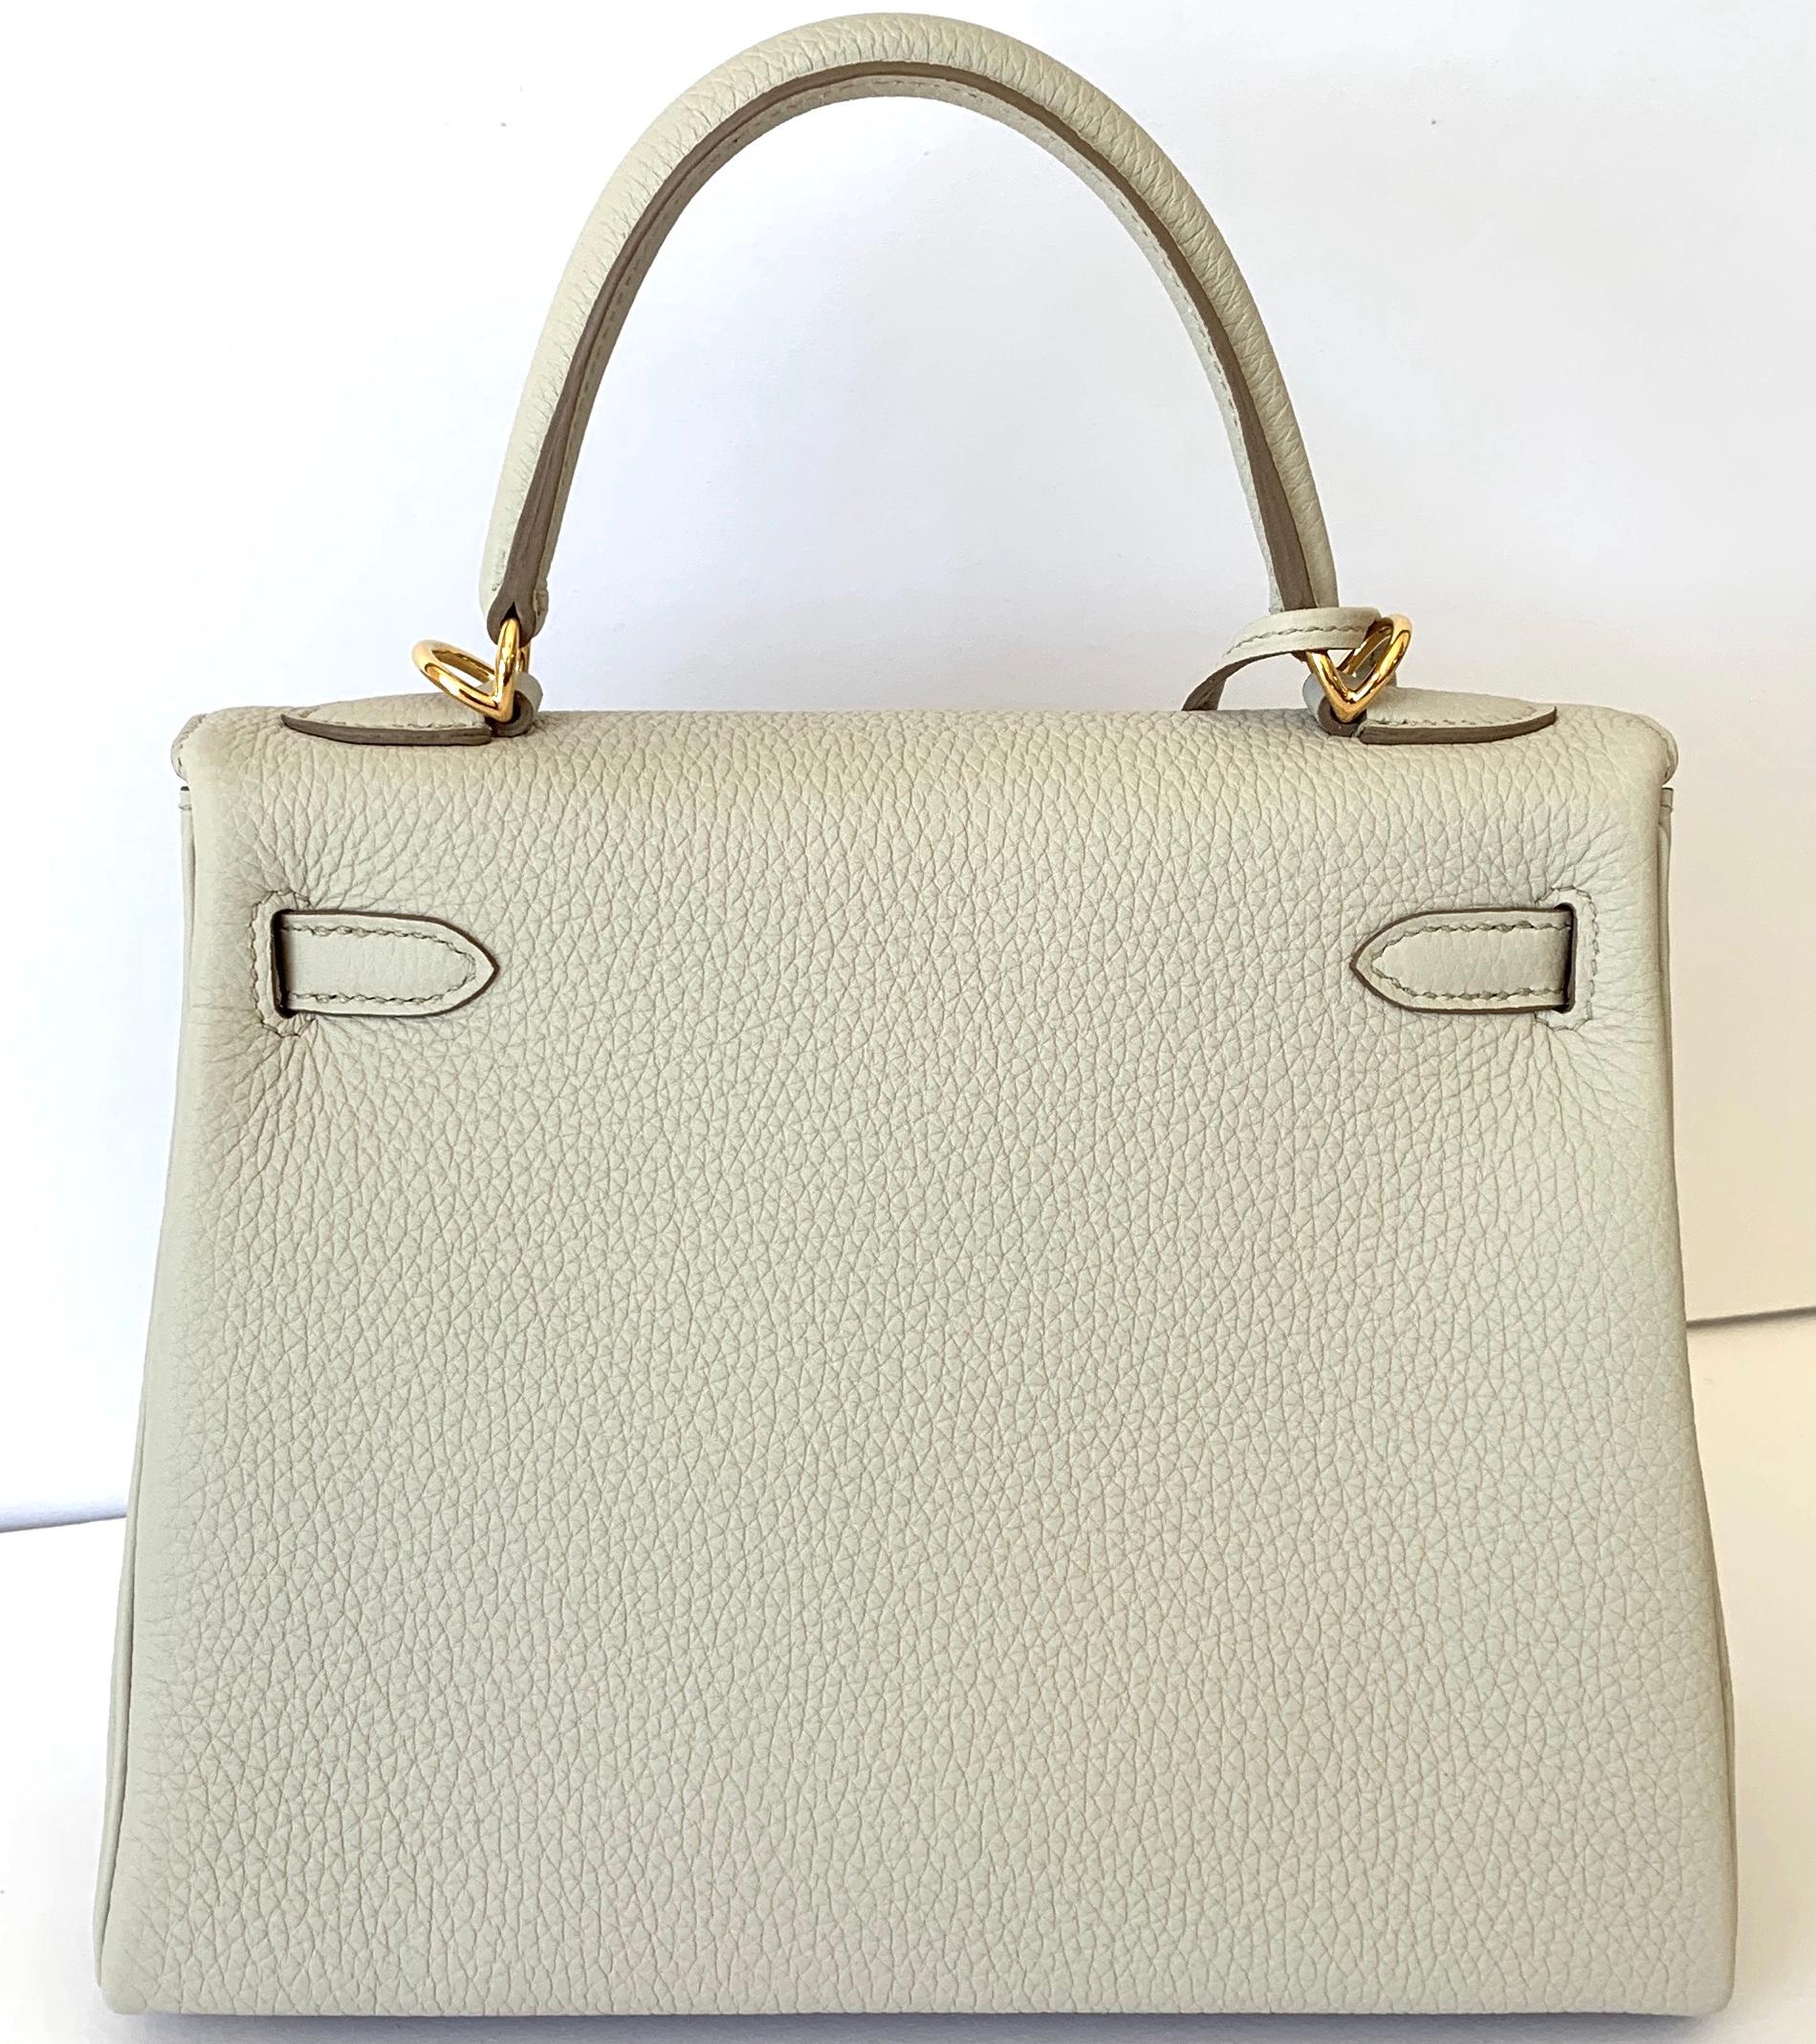 Hermes 25cm Kelly
Beton Togo Leather, a creamy white with a hint of grey is the way we would describe it
Tonal Top stitch
Togo is great for everyday use, as it is one of the most durable leathers, scratch resistant
Gold Hardware
Retourne